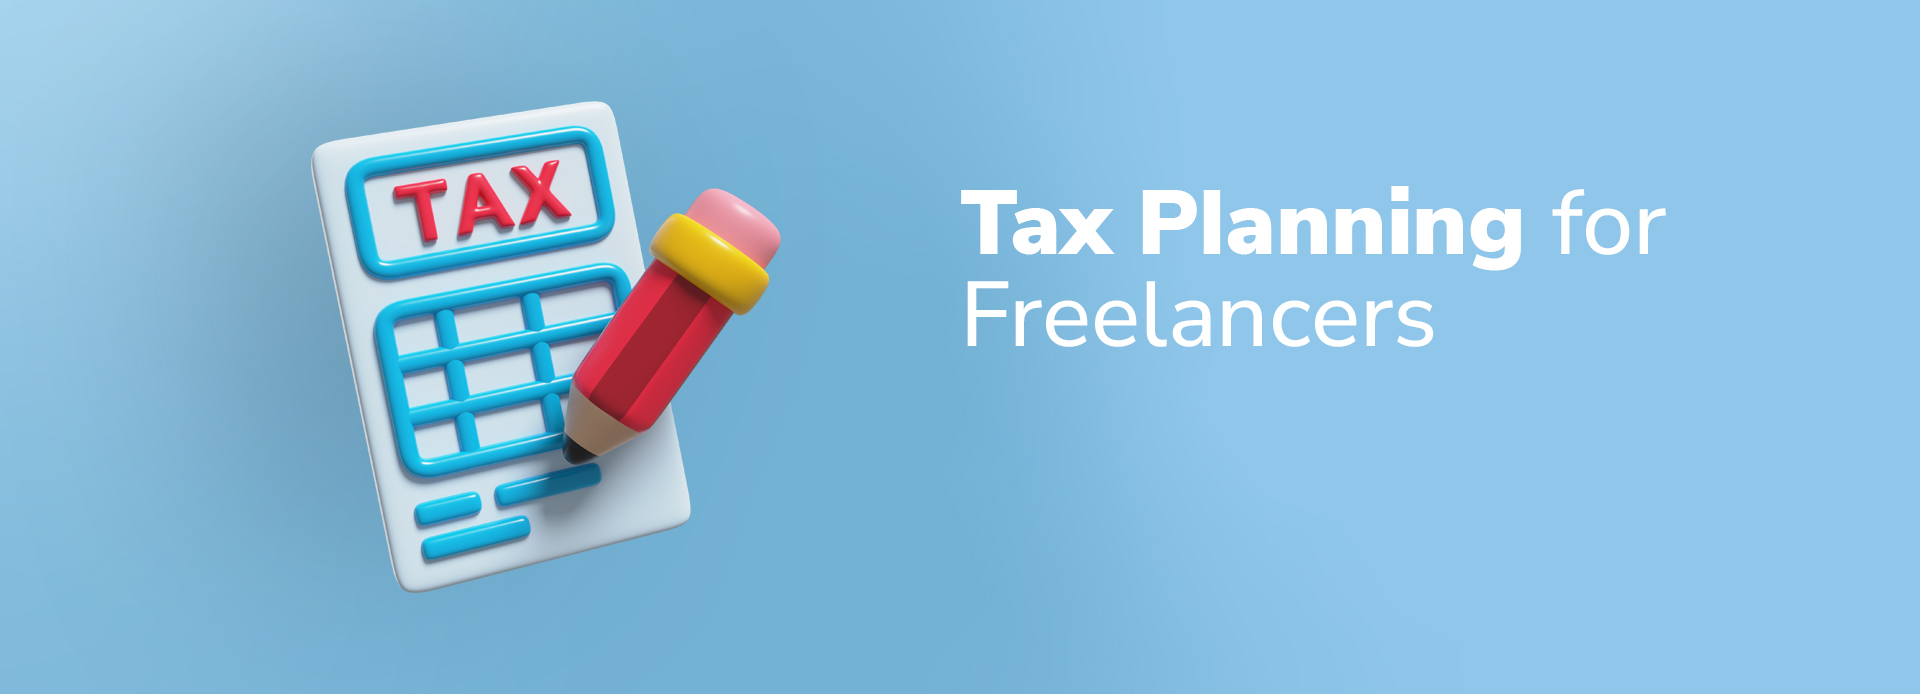 Tax Planning For Freelancers and Self-Employed Individuals